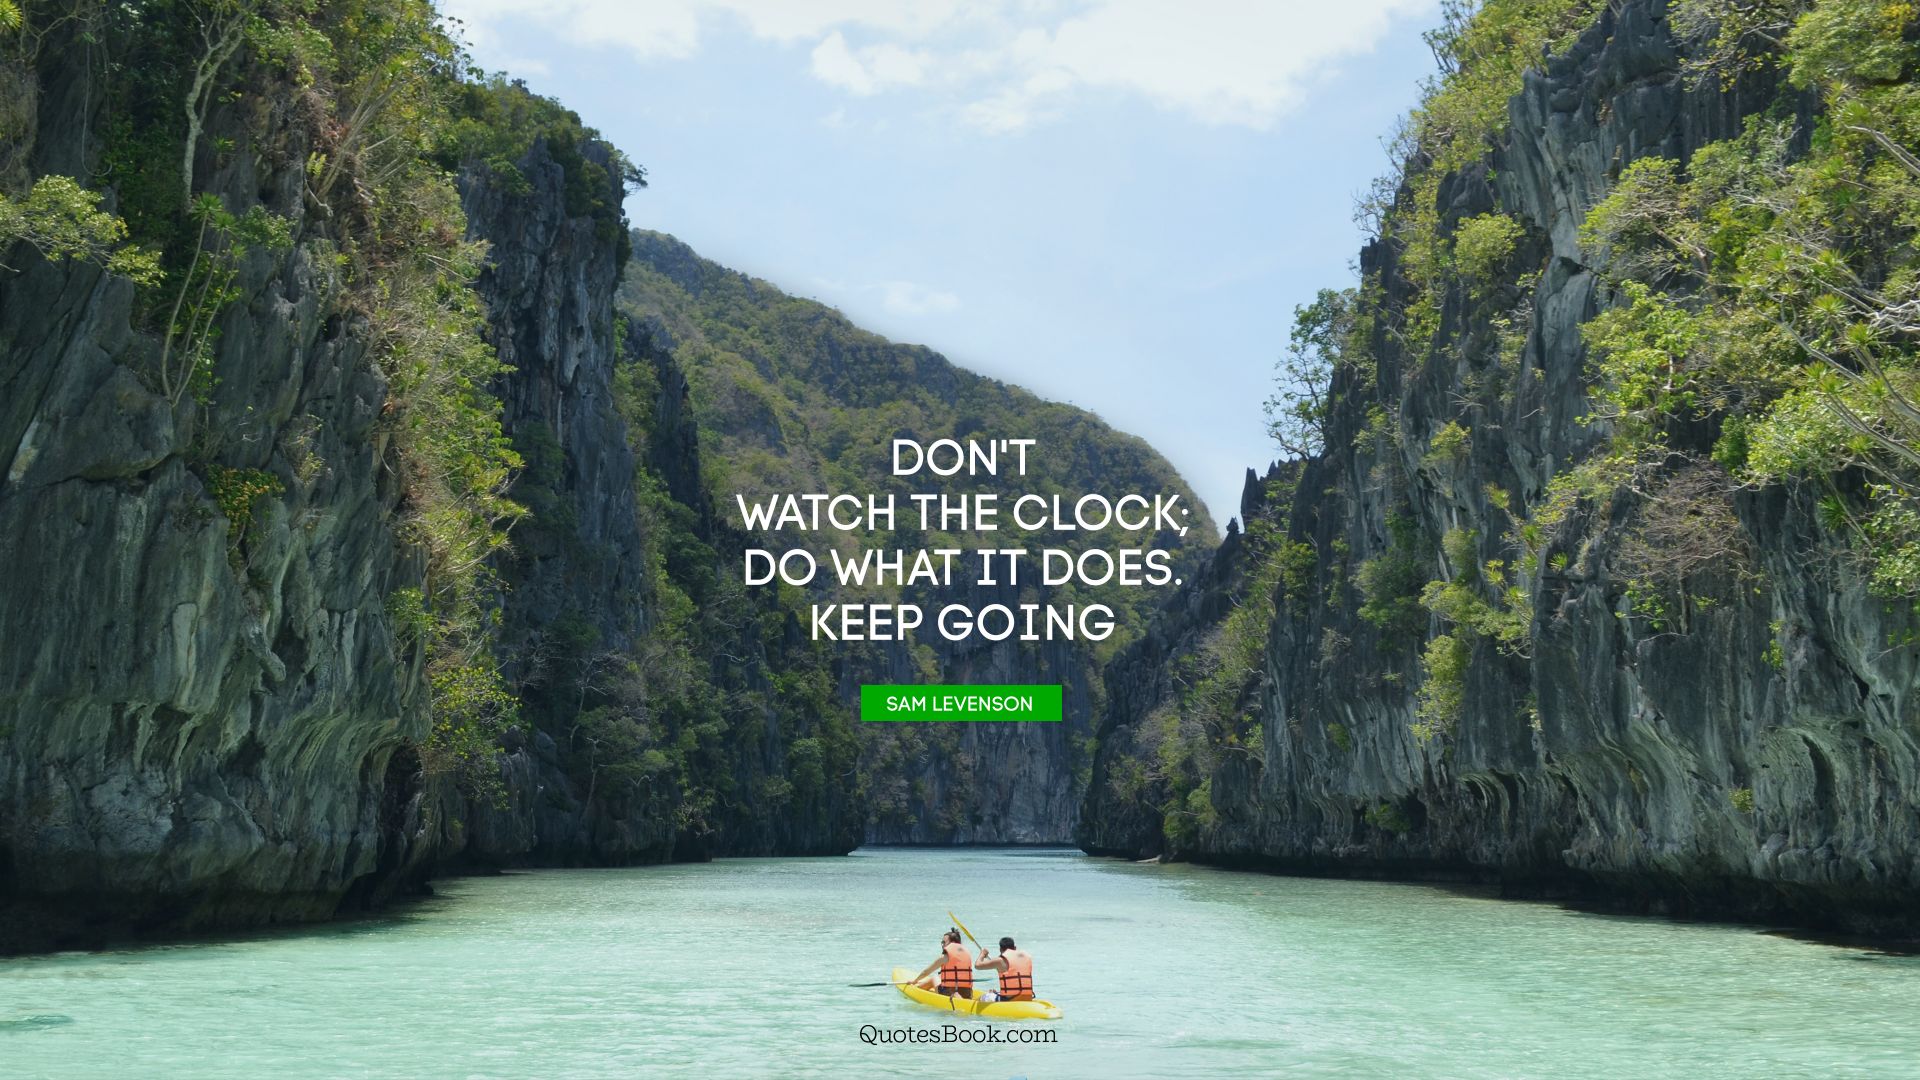 Don't watch the clock; Do what it does. Keep going. - Quote by Sam Levenson